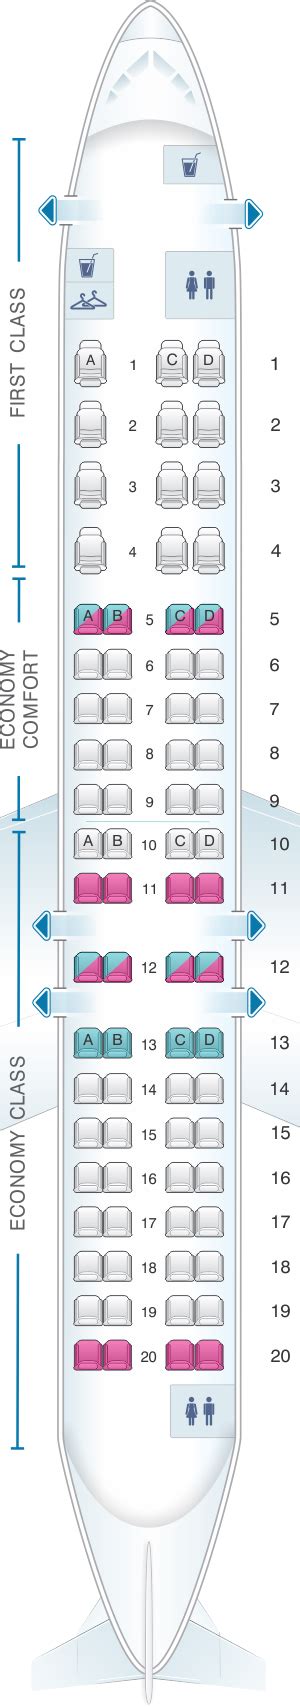 Audio and video in-flight entertainment systems are available on the CRJ1000 NextGen jet, this includes a seat back option. Below are the dimensions of the Bombardier CRJ1000 interior / cabin: Cabin Length: 77 ft. 6 in. or 23.60 m. Cabin Maximum Width: 8 ft. 4 in. 2.55 m (Centerline). 